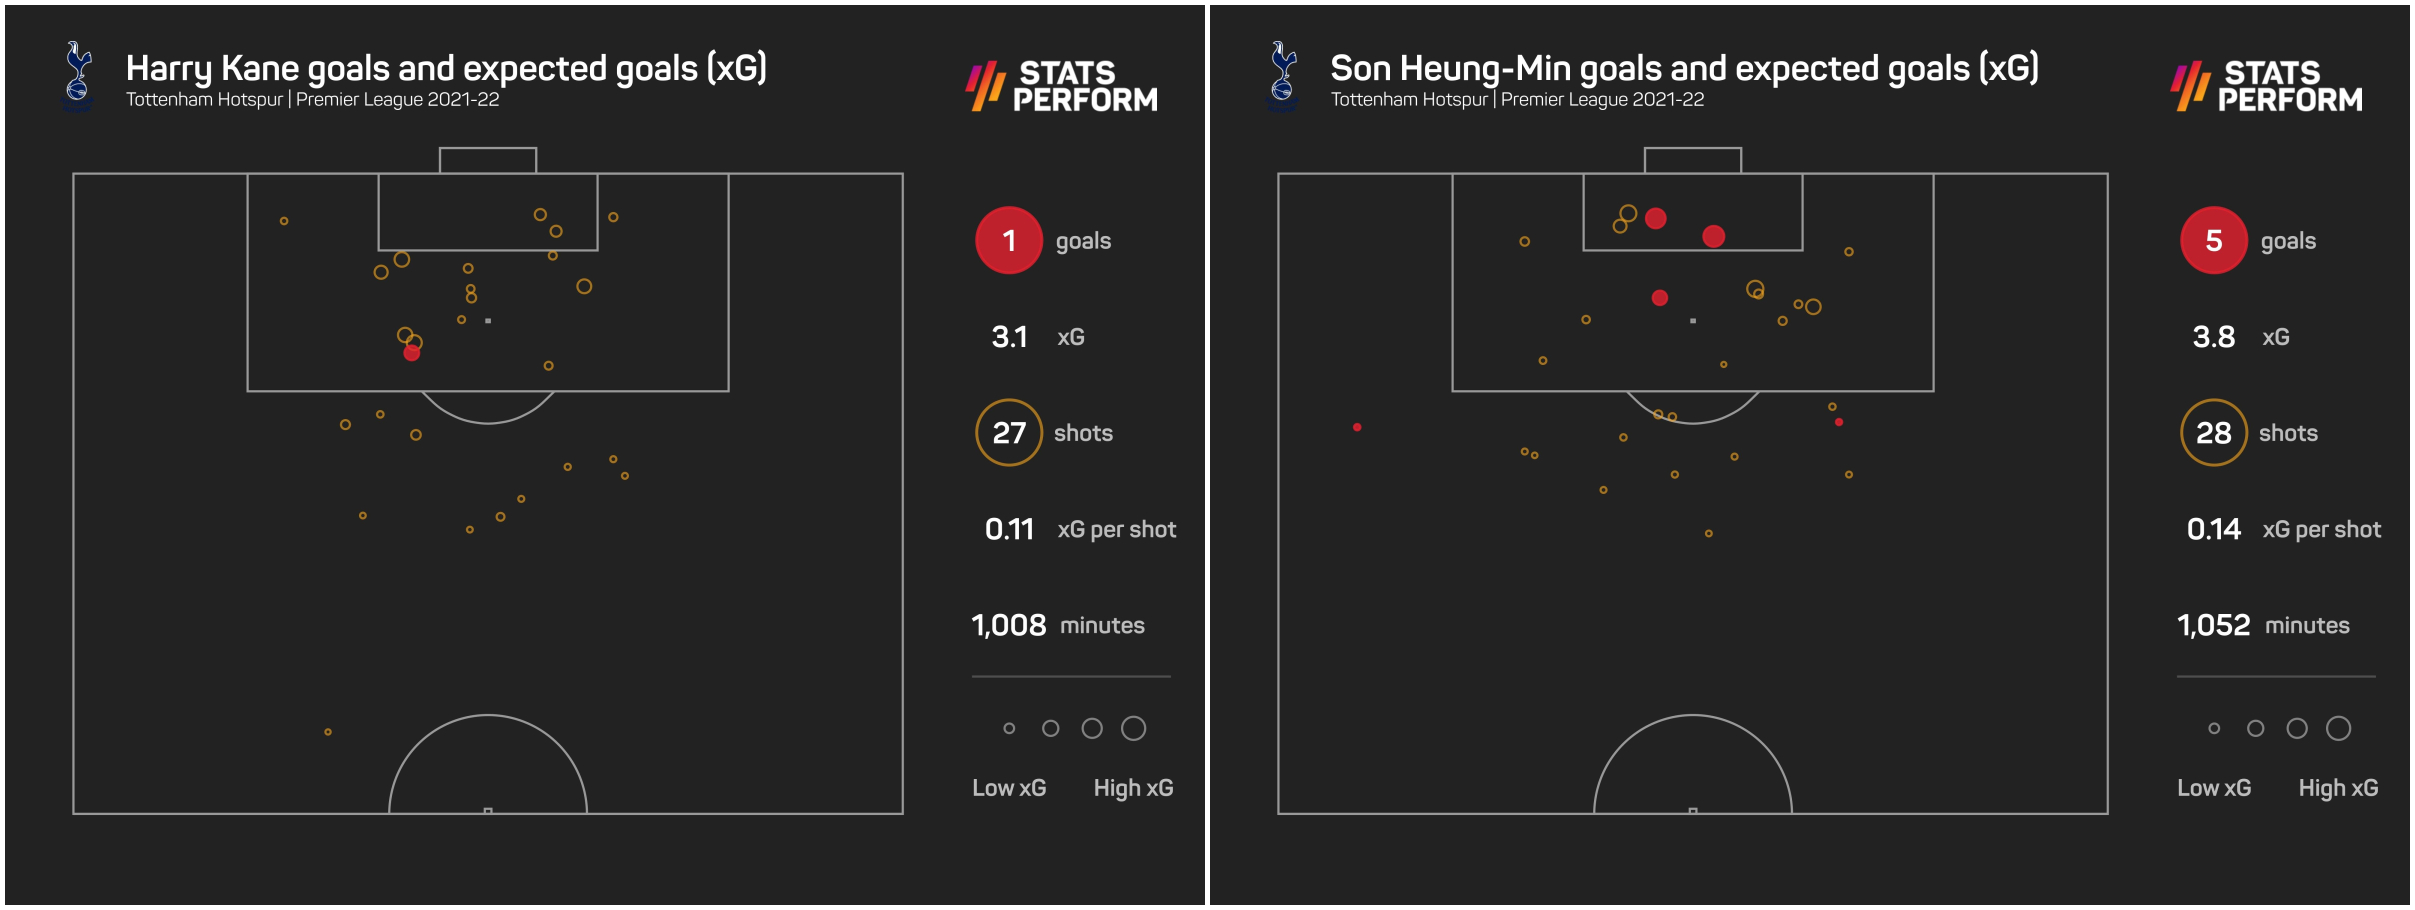 Harry Kane and Son Heung-min